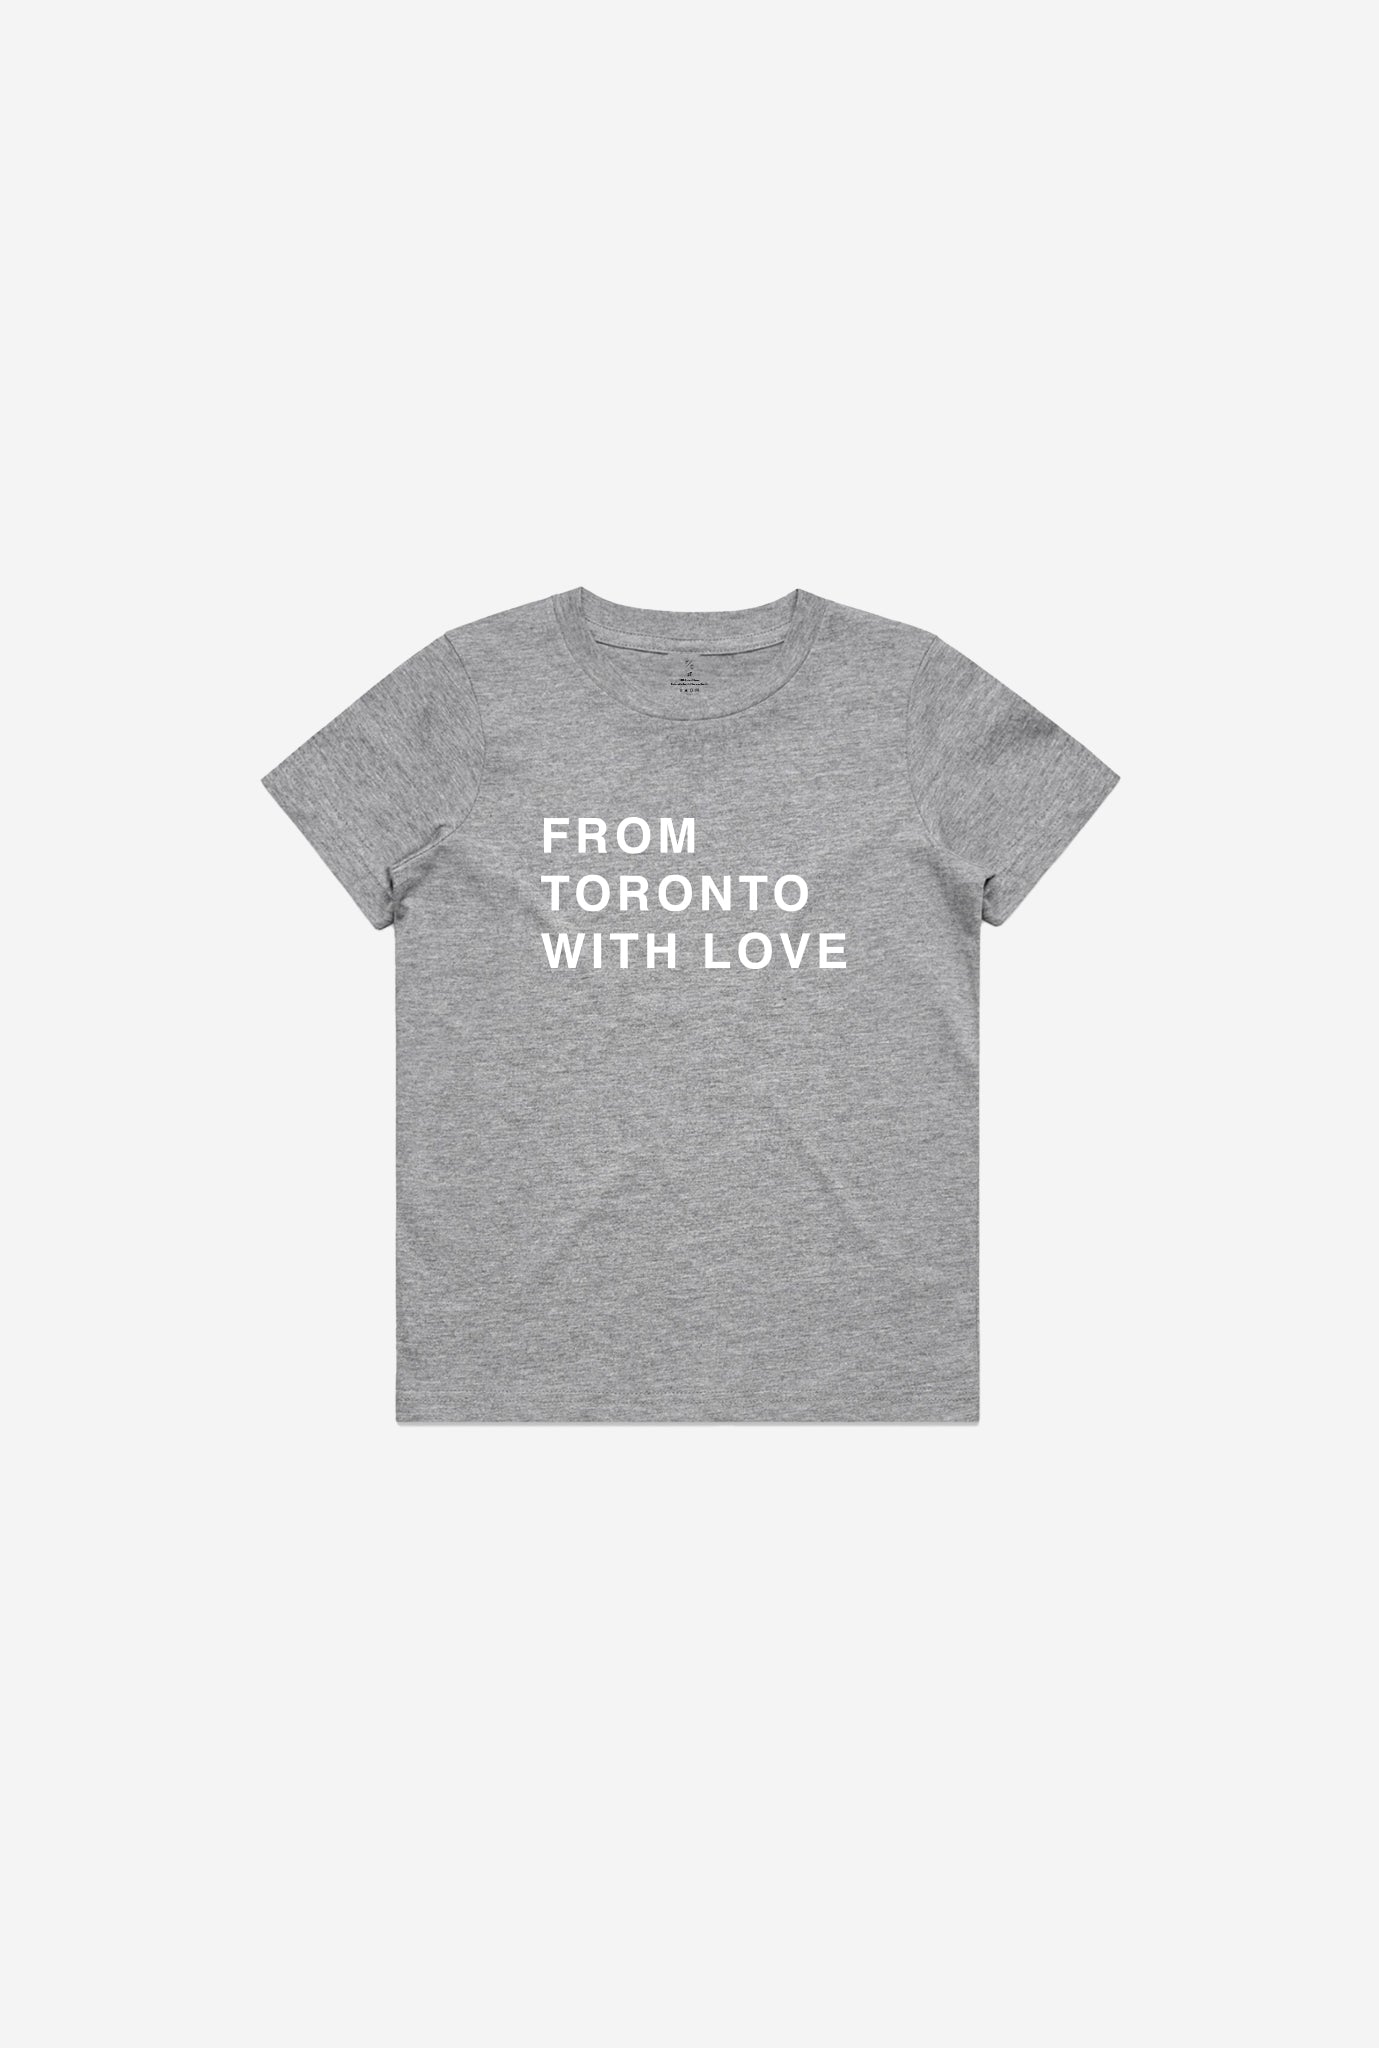 From Toronto with Love Kids T-Shirt - Grey